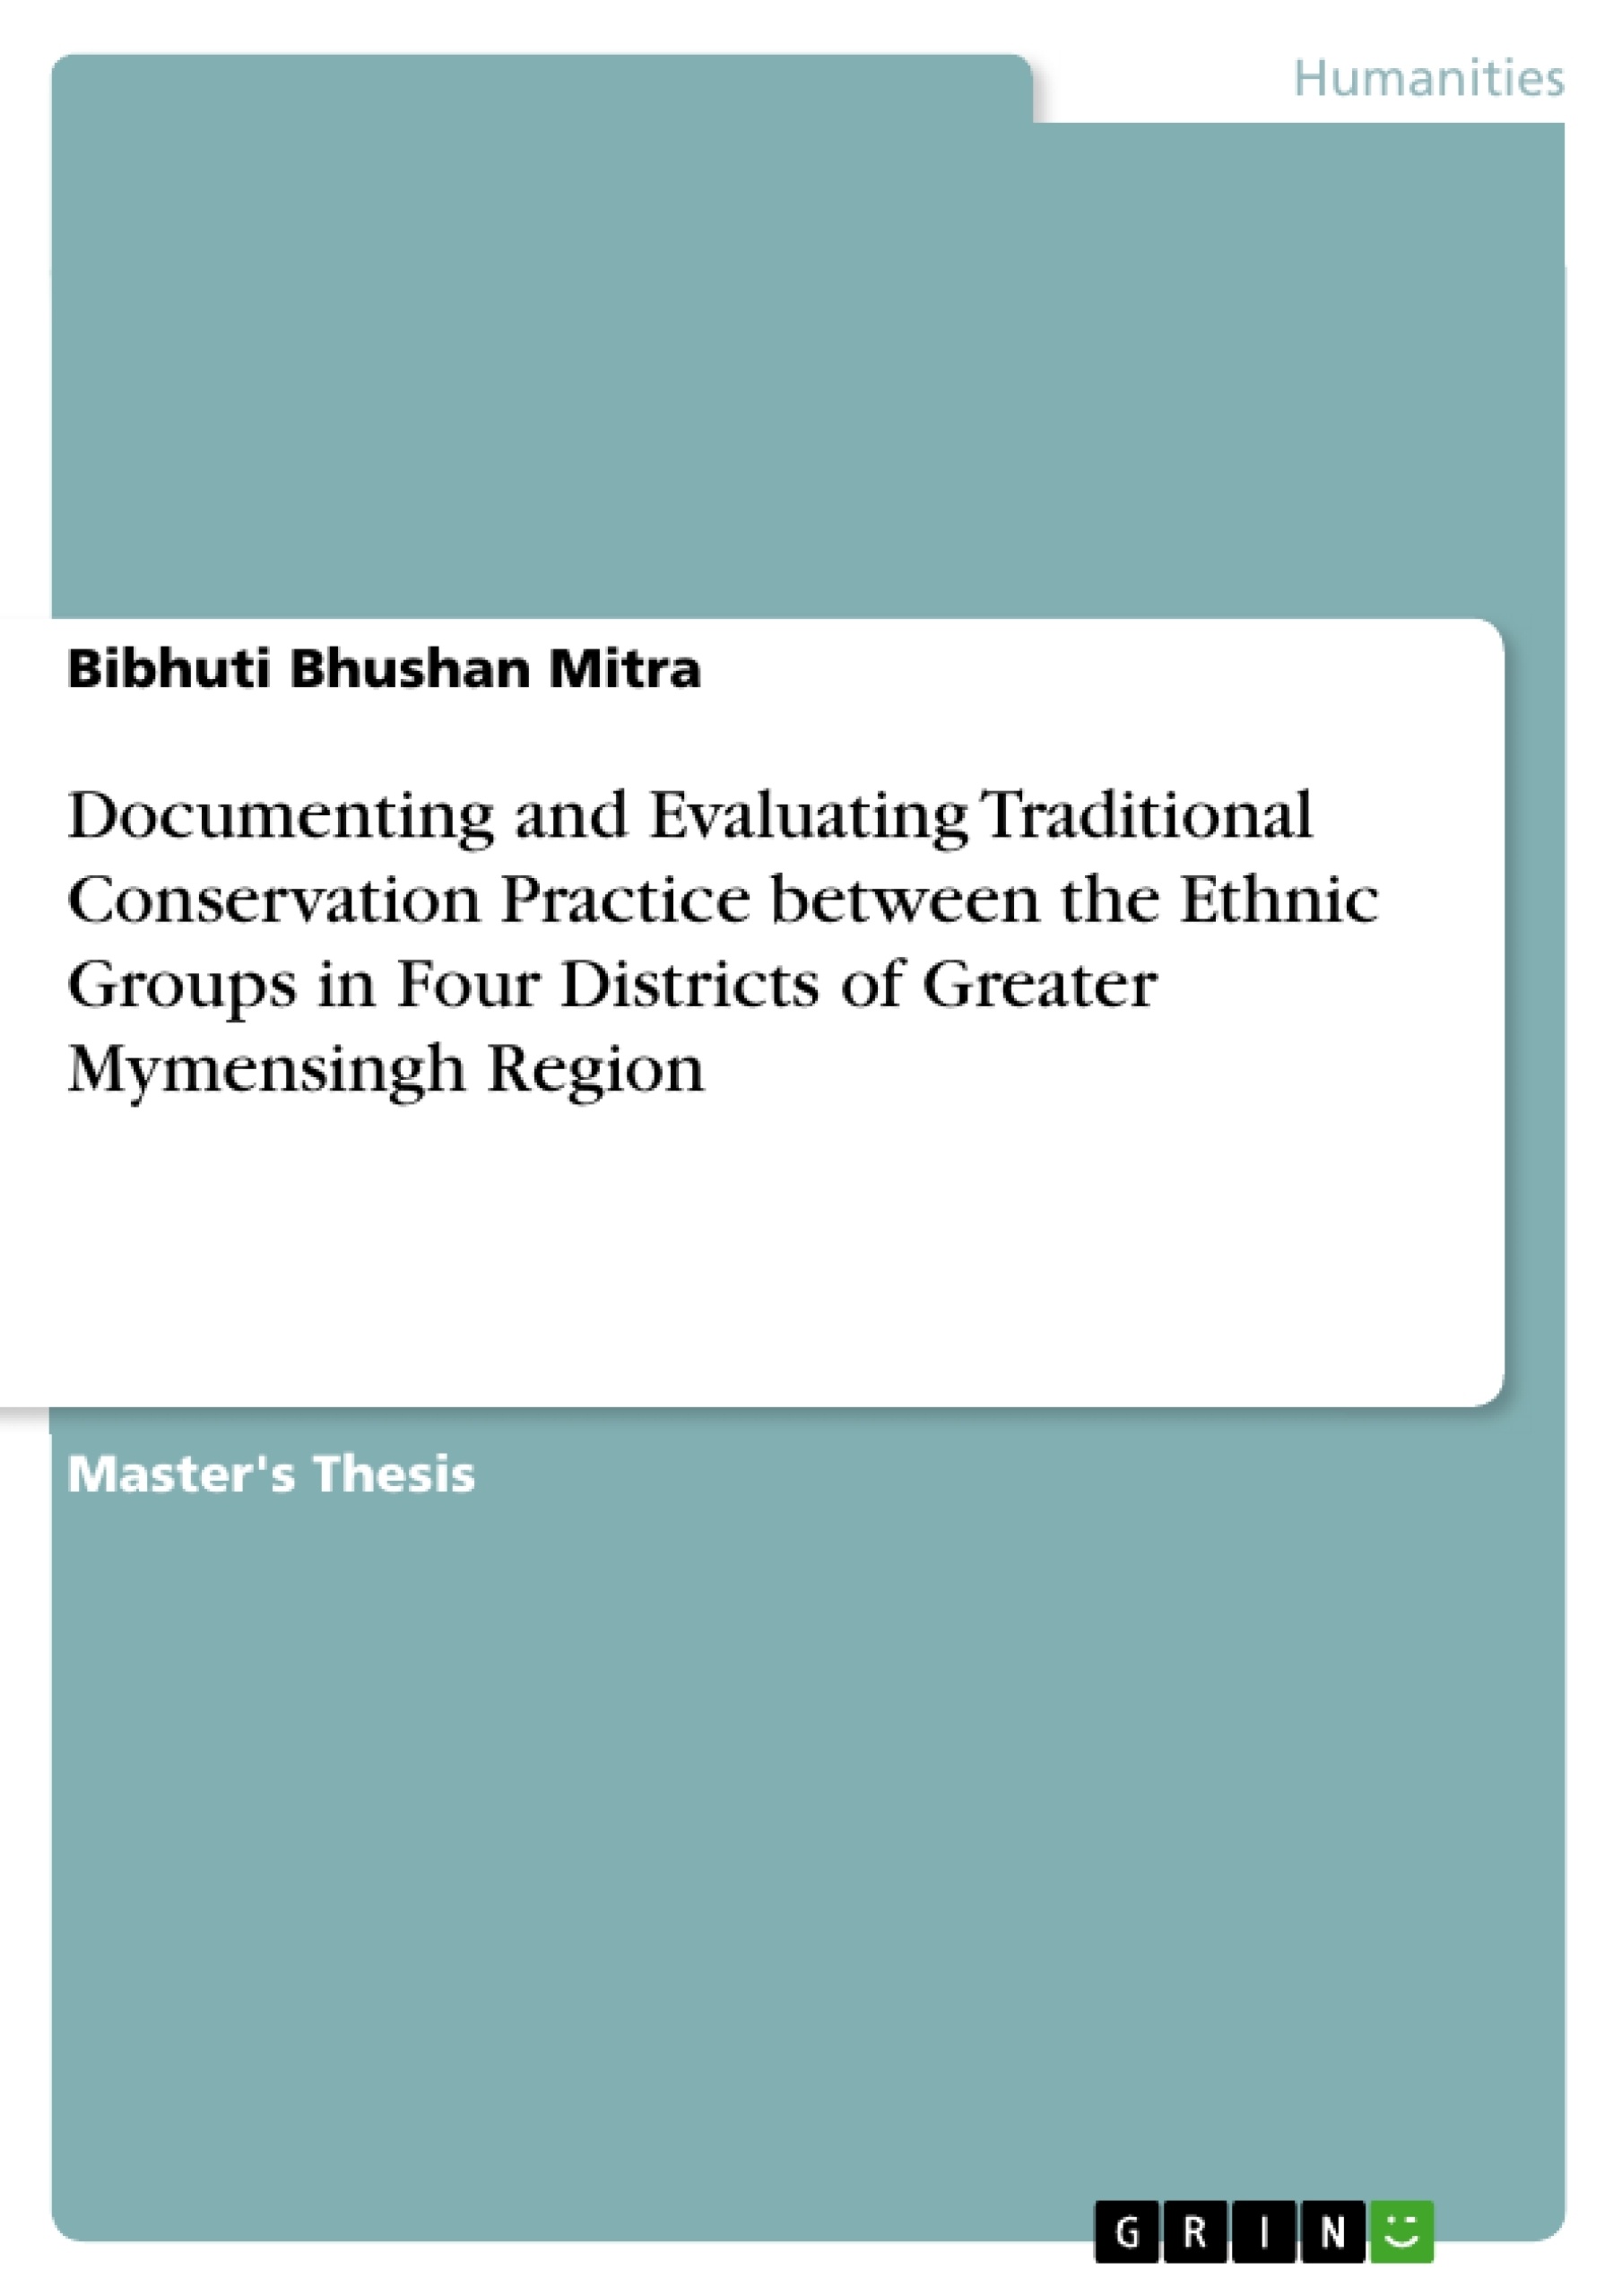 Title: Documenting and Evaluating Traditional Conservation Practice between the Ethnic Groups in Four Districts of Greater Mymensingh Region